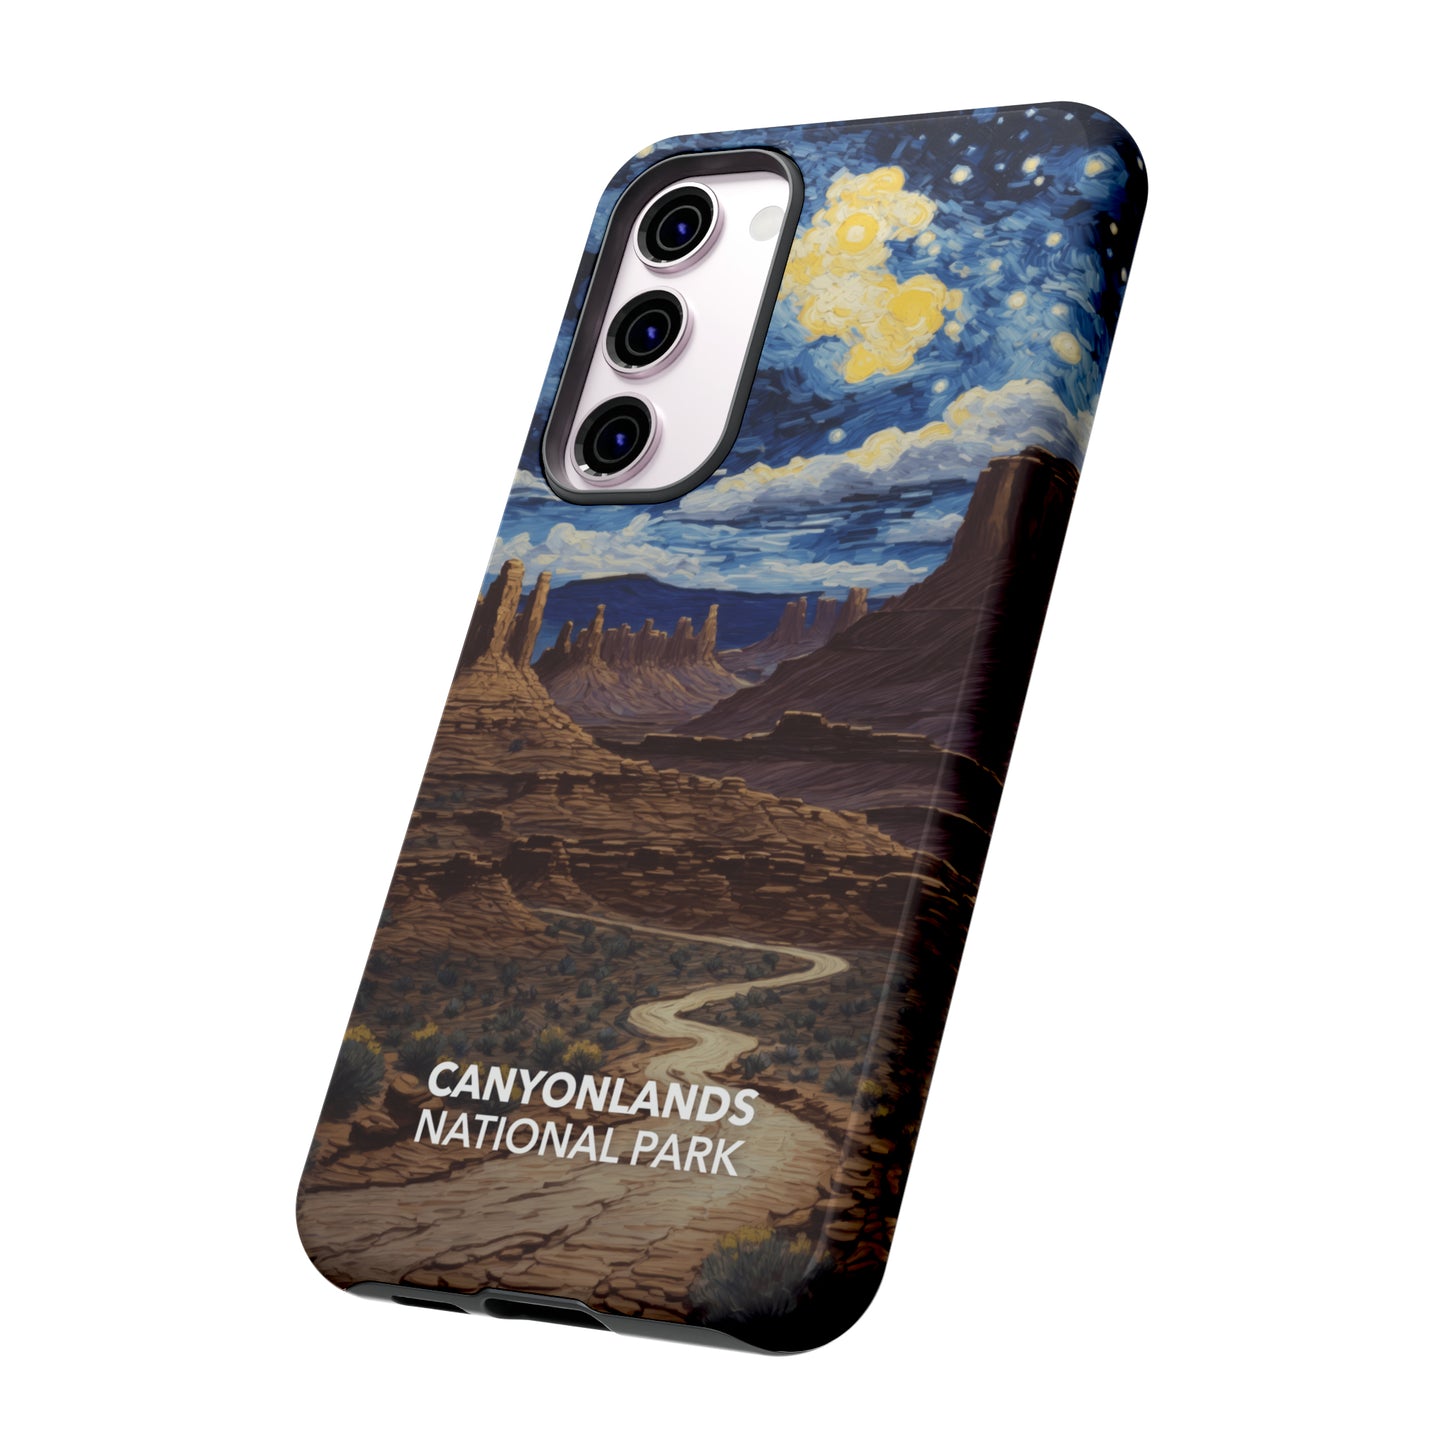 Canyonlands National Park Phone Case - Starry Night